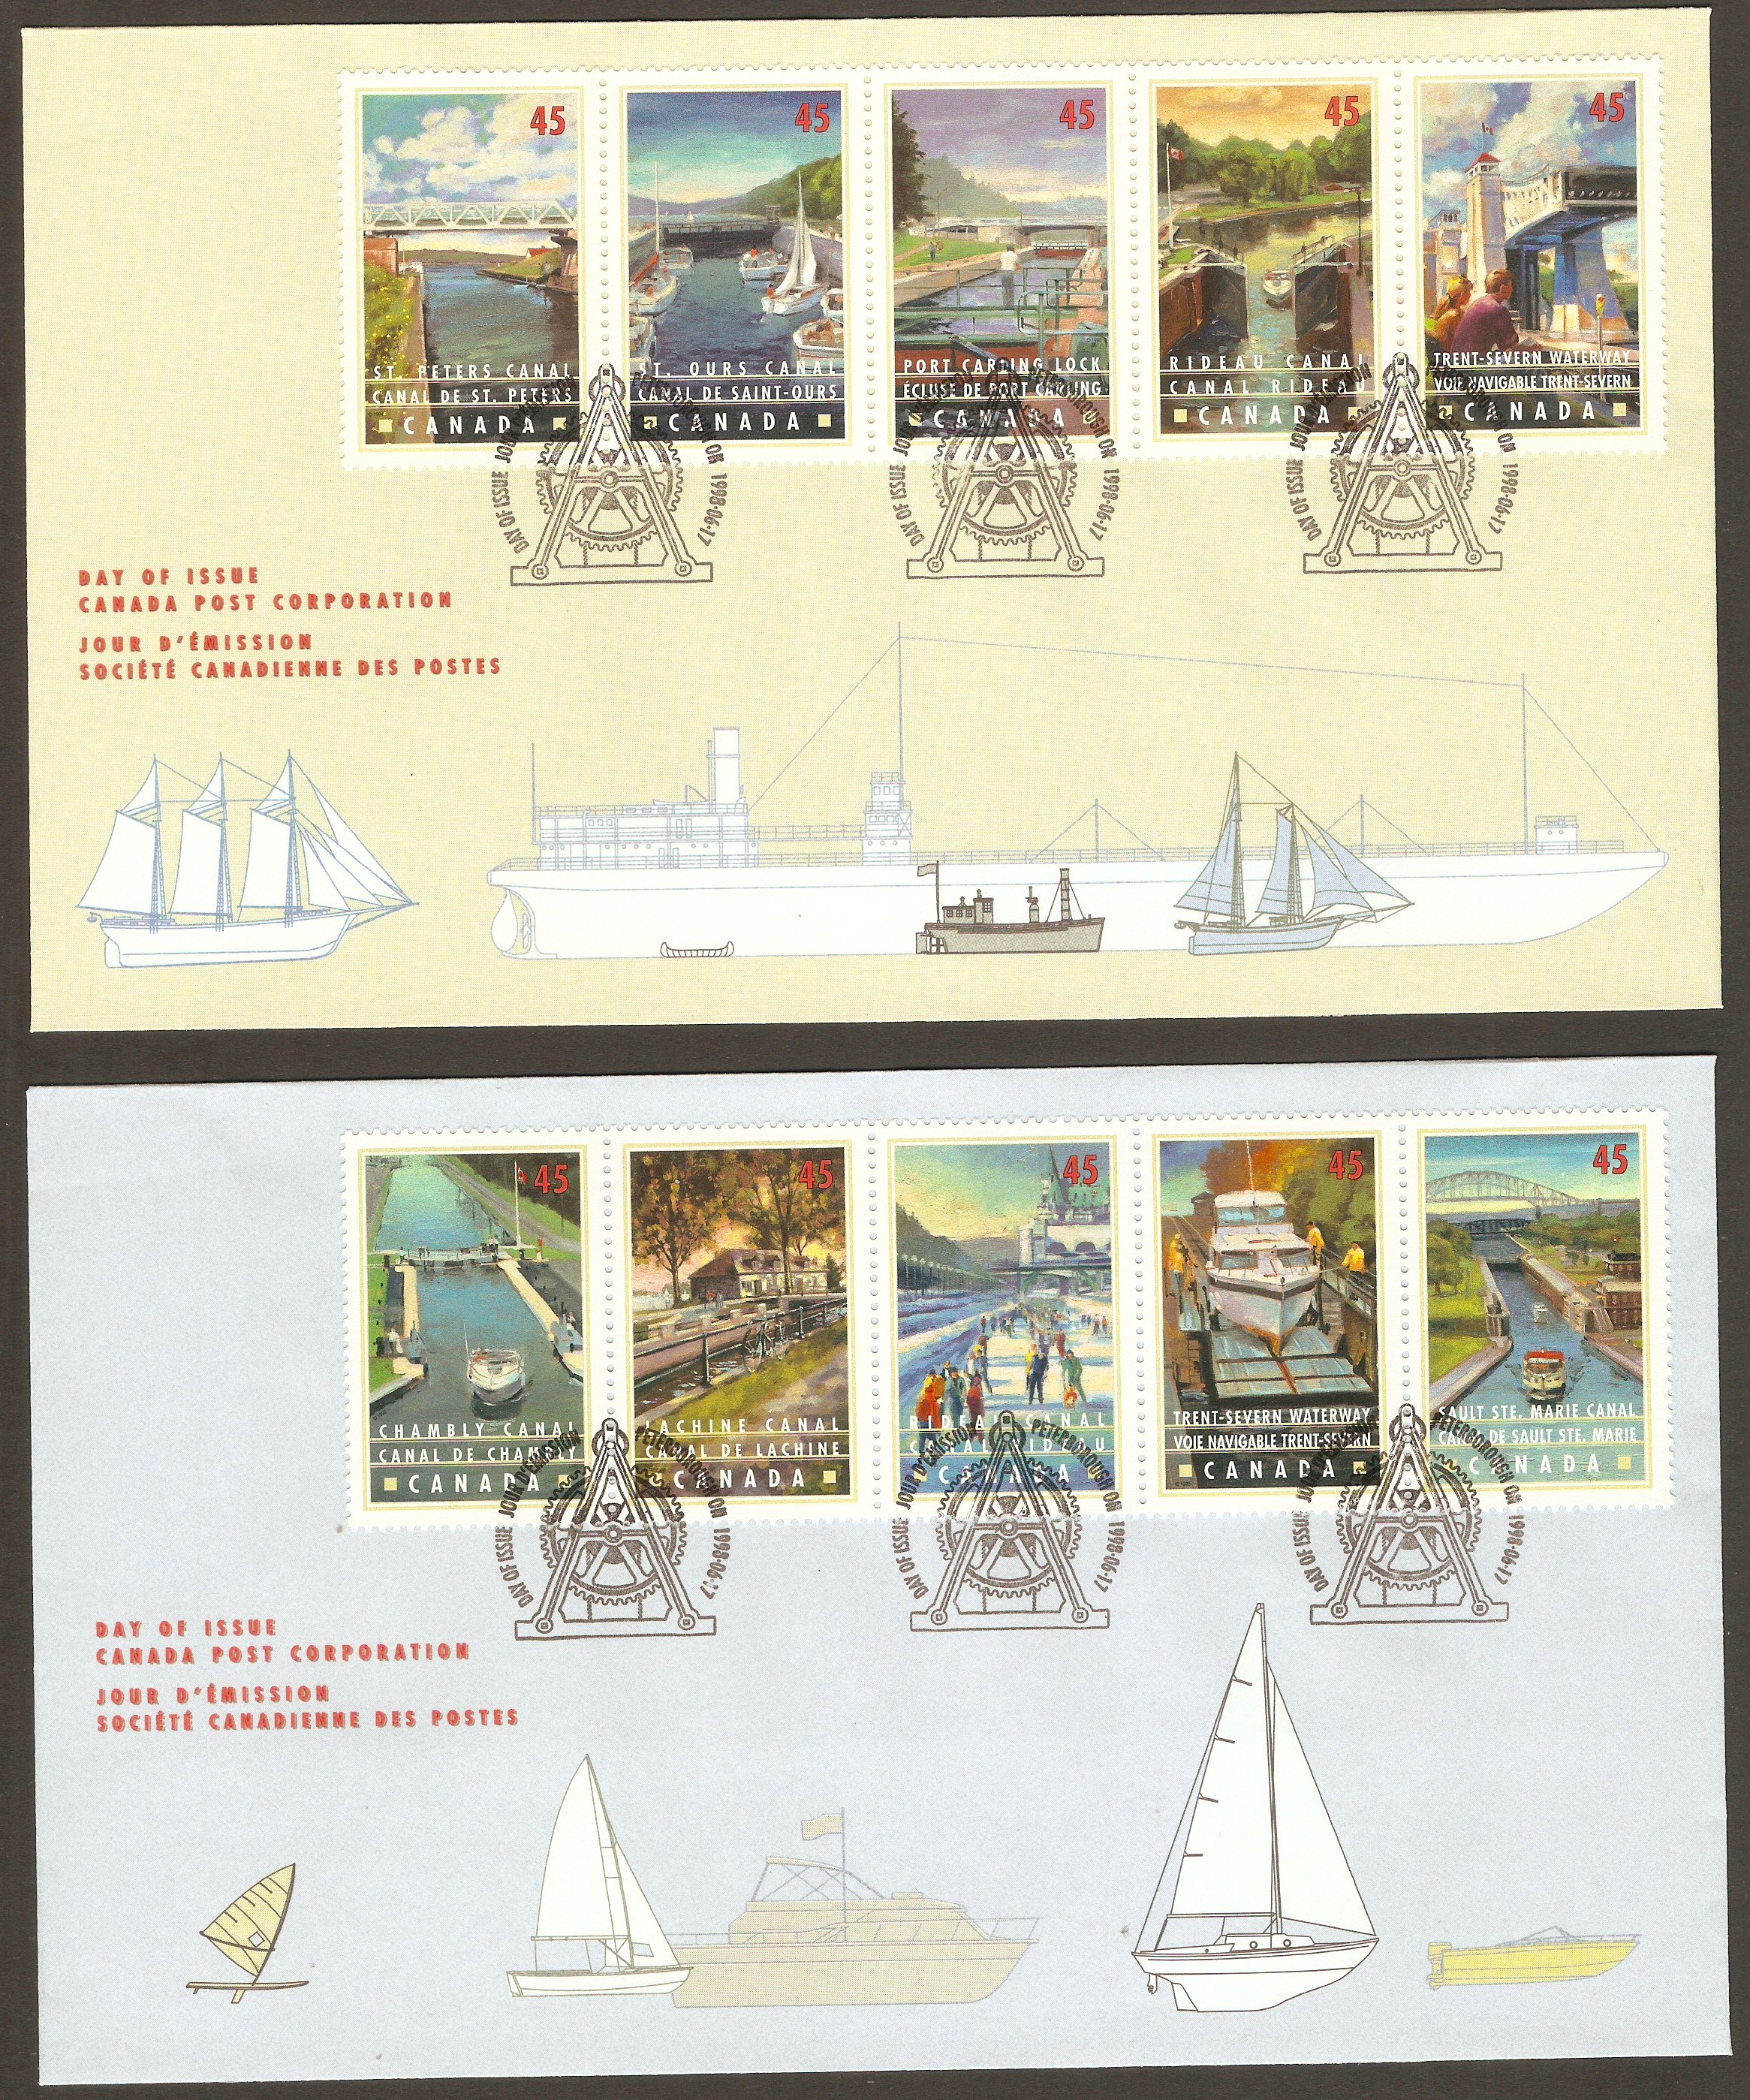 Canada 1998 Canadian Canals FDC.